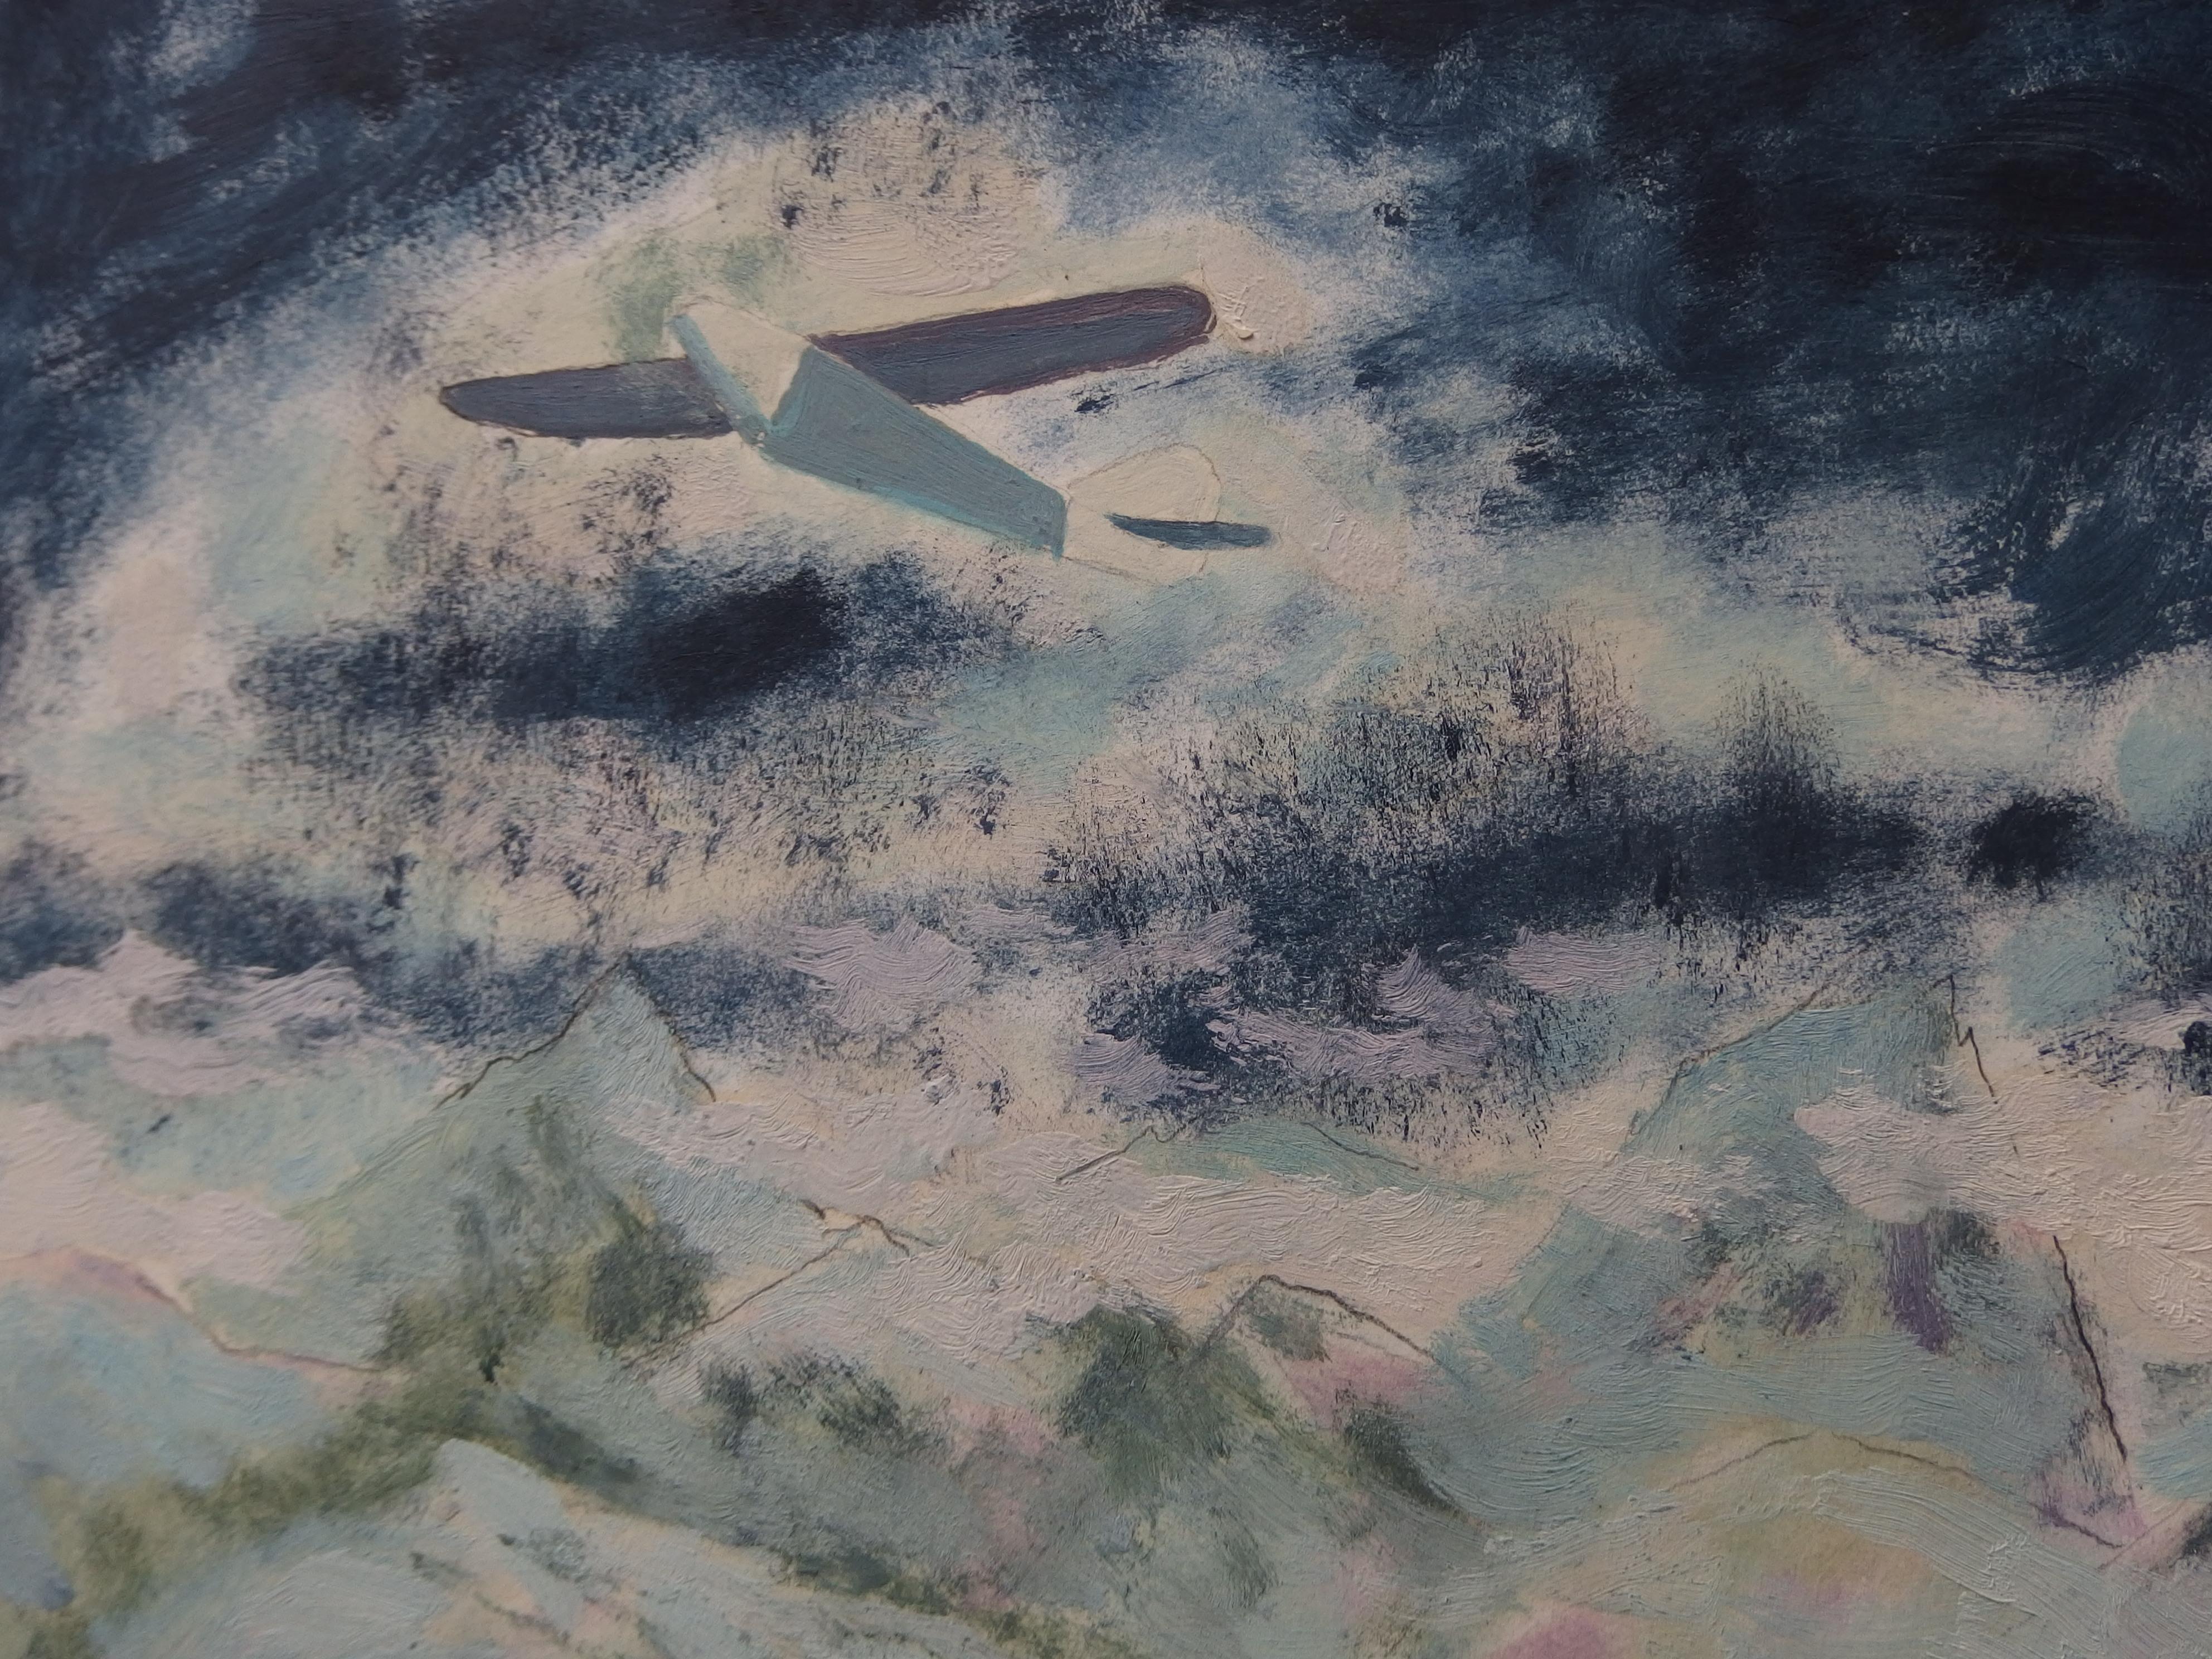 Saint Exupery : Flight over the Alpes - Original painting, Handsigned - Modern Art by Jules Cavailles